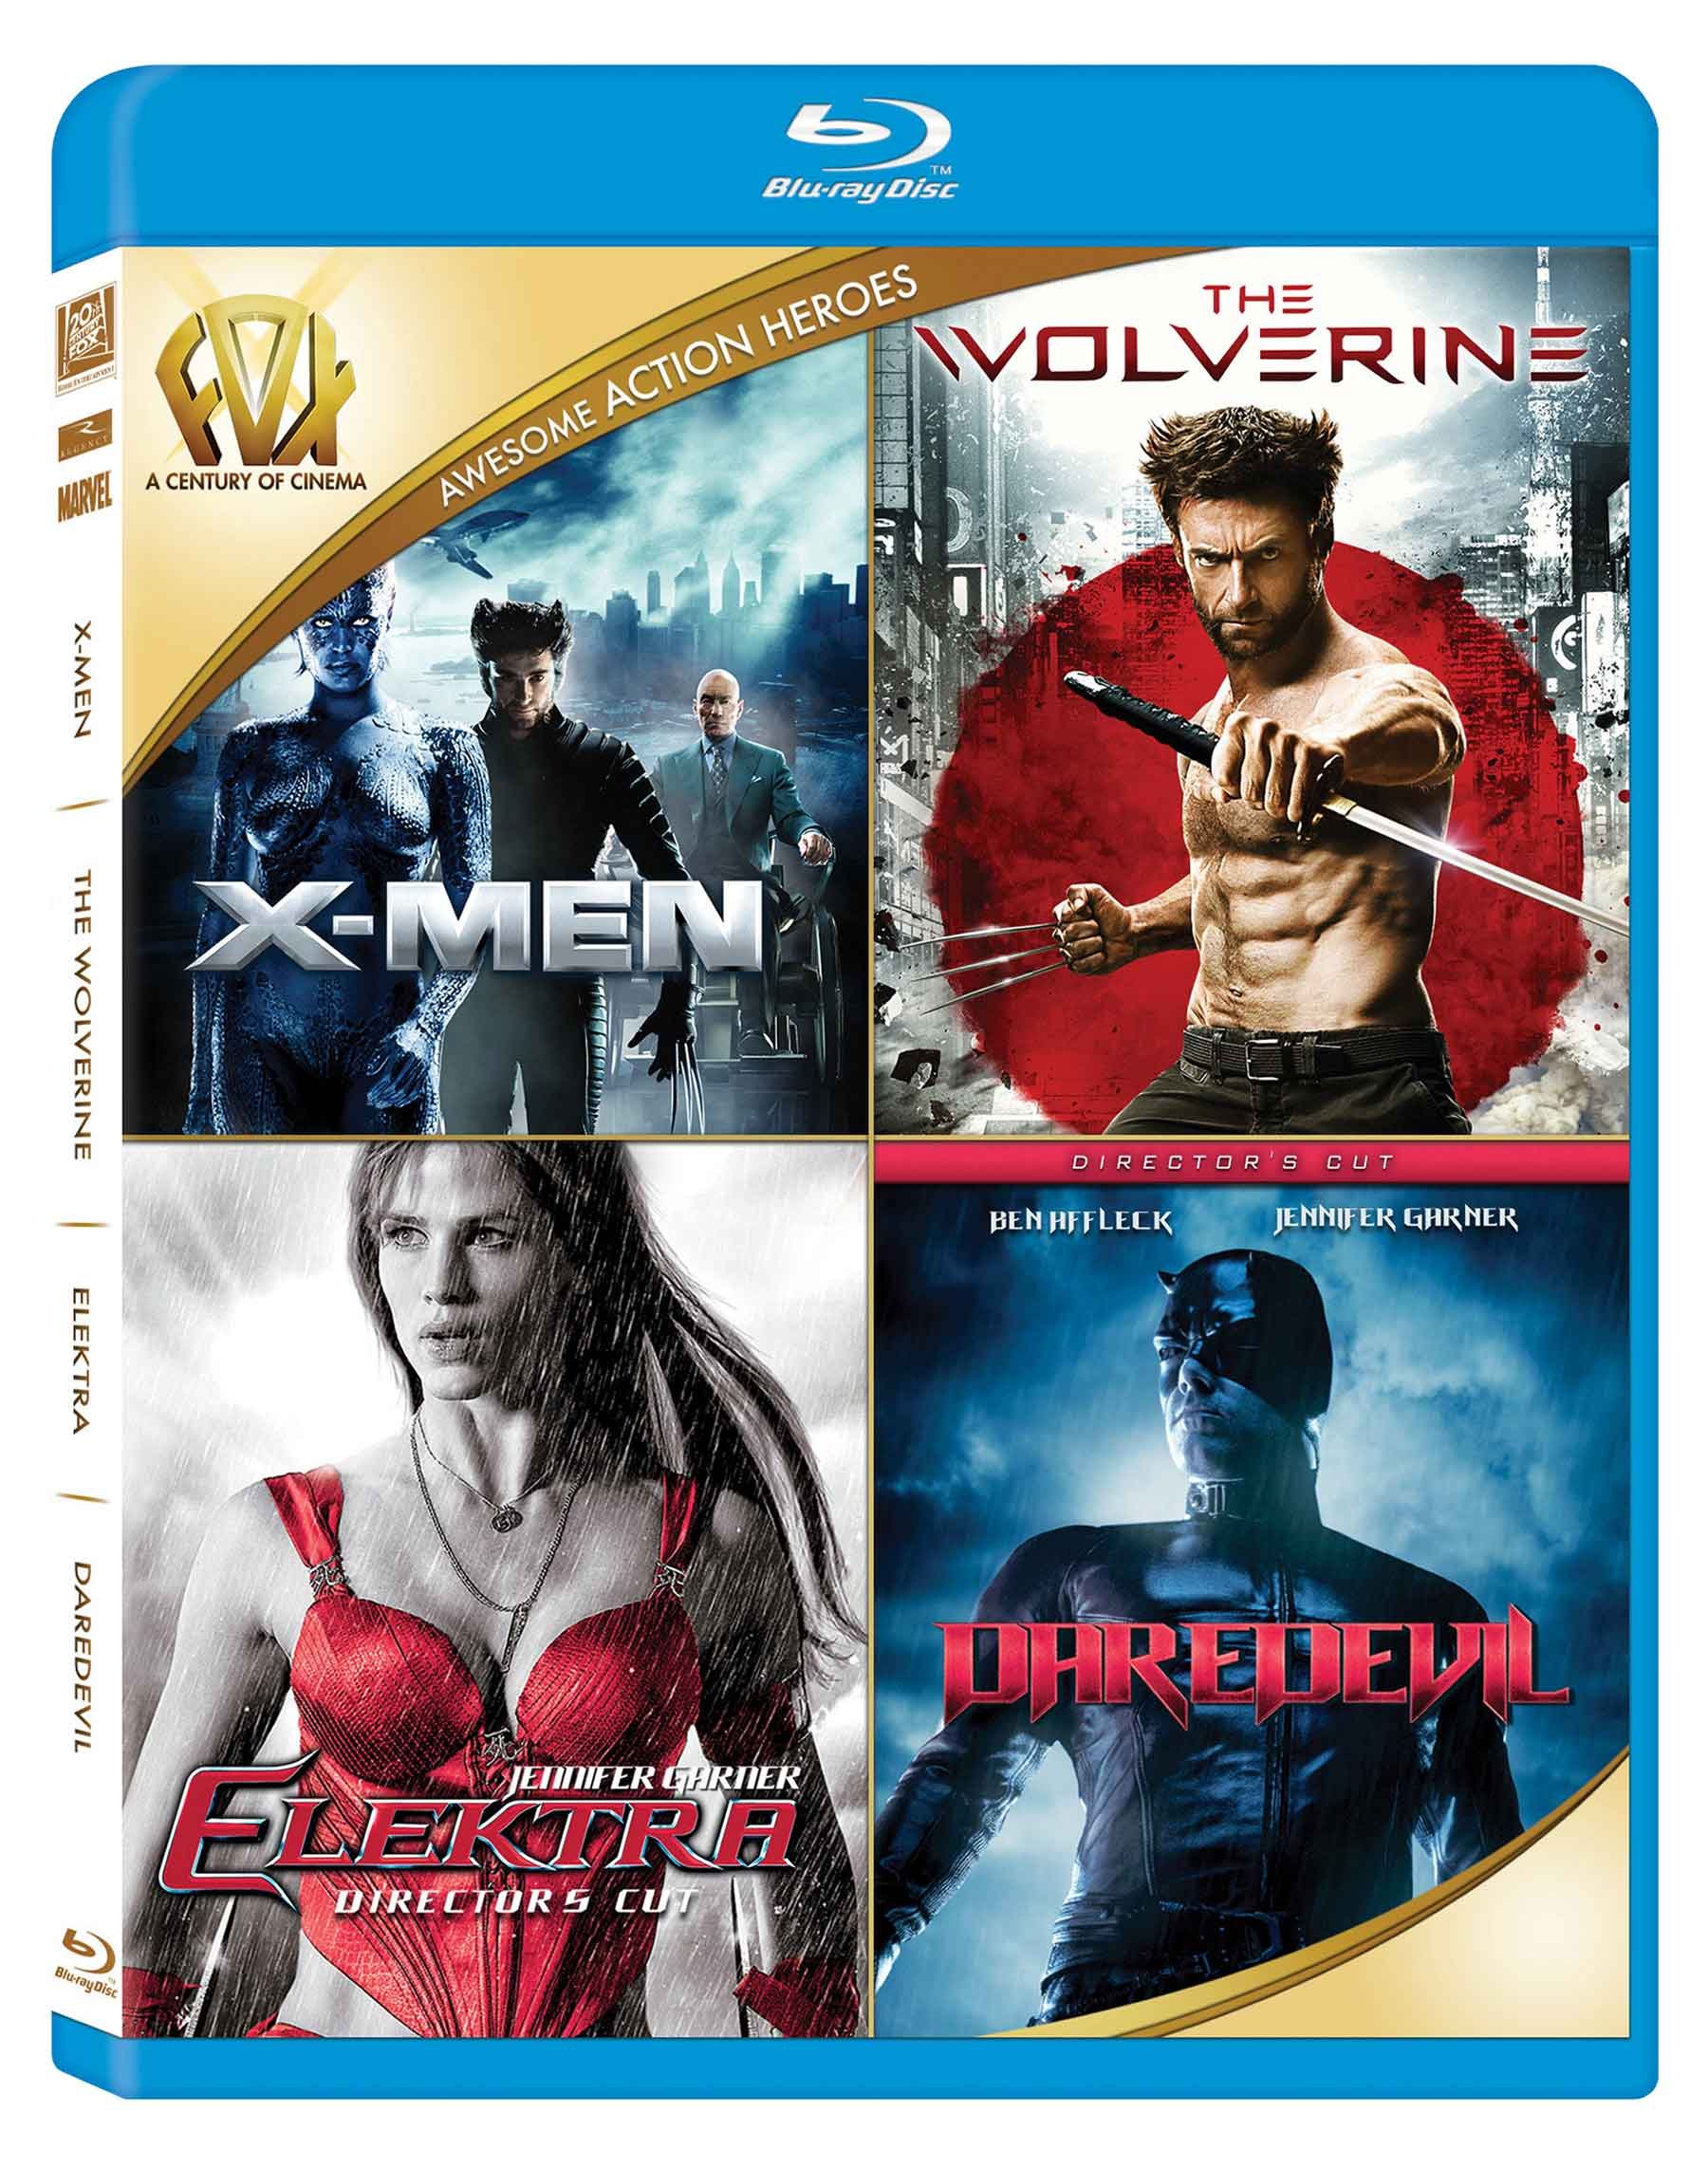 awesome-action-heroes-x-men-the-wolverine-elektra-daredevil-4-disc-box-set